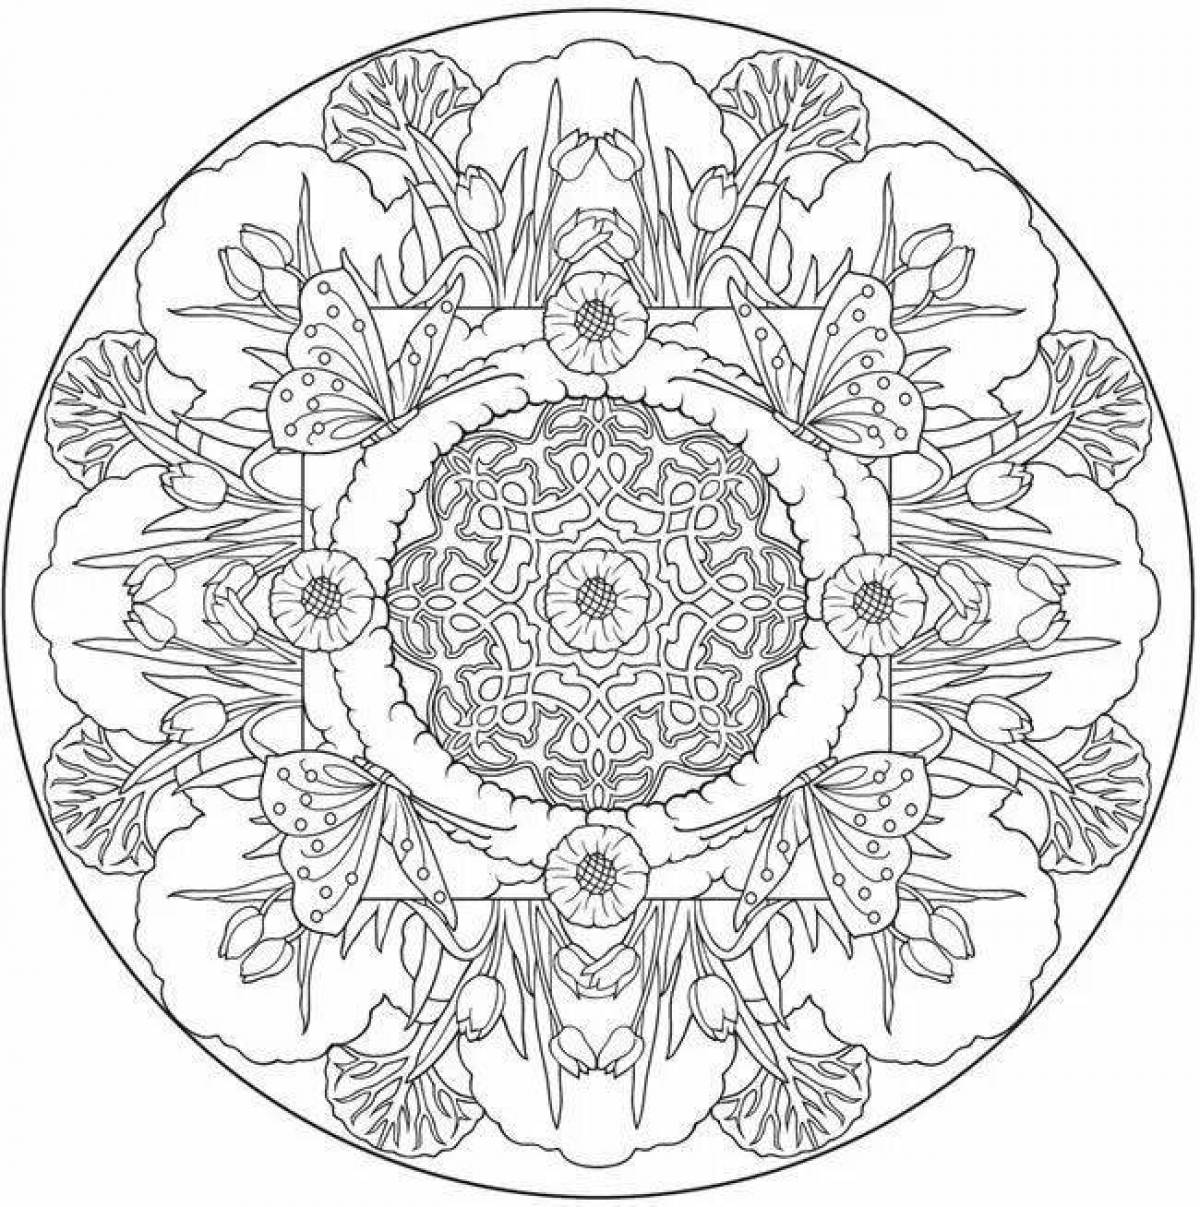 Coloring page peaceful circle of life